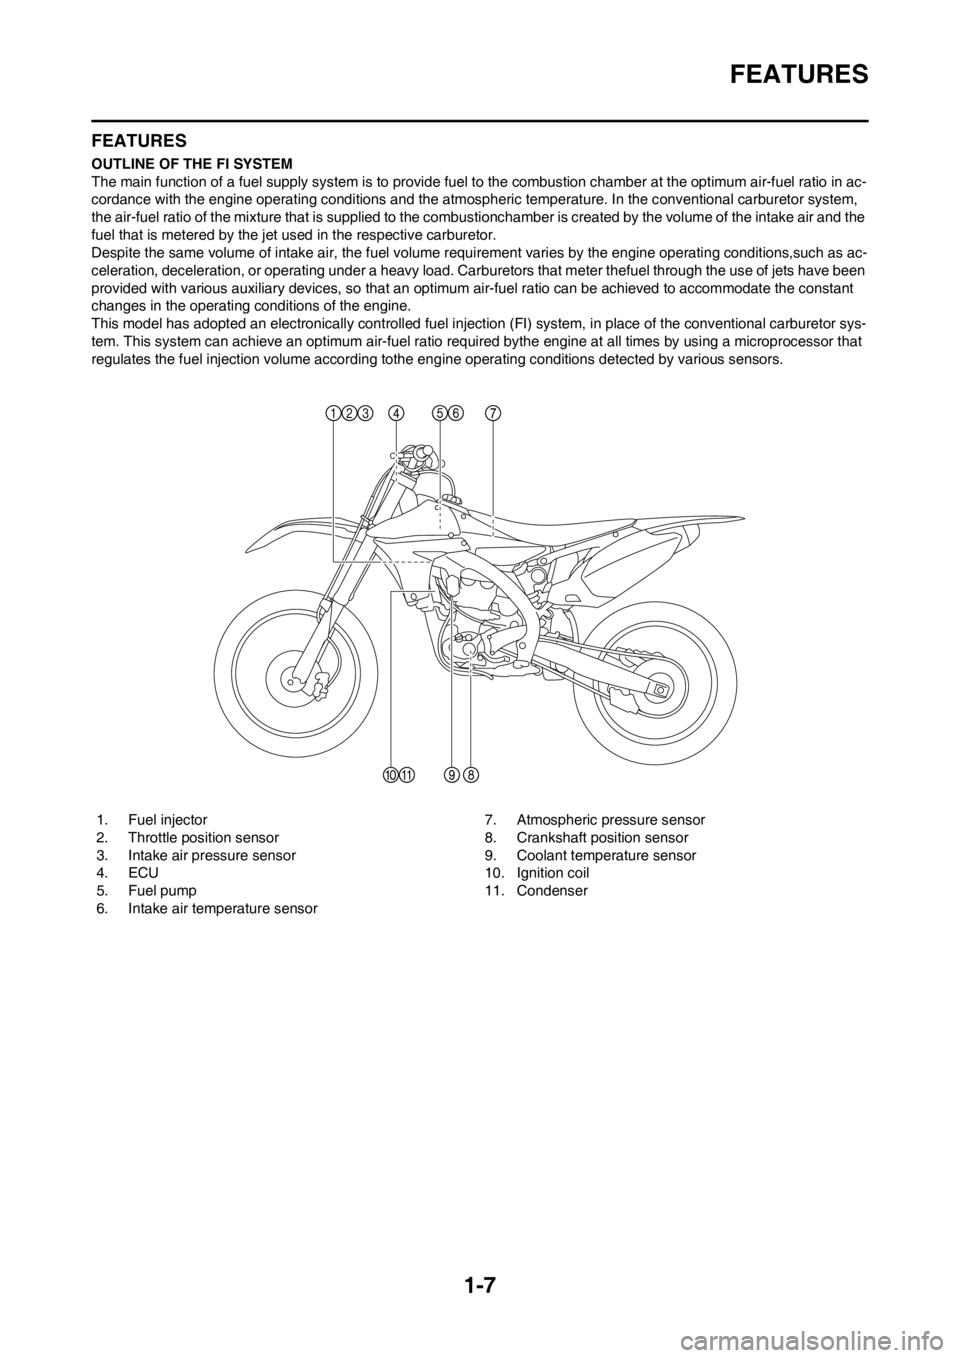 YAMAHA YZ450F 2013  Owners Manual 1-7
FEATURES
FEATURES
OUTLINE OF THE FI SYSTEM
The main function of a fuel supply system is to provide fuel to the combustion chamber at the optimum air-fuel ratio in ac-
cordance with the engine oper